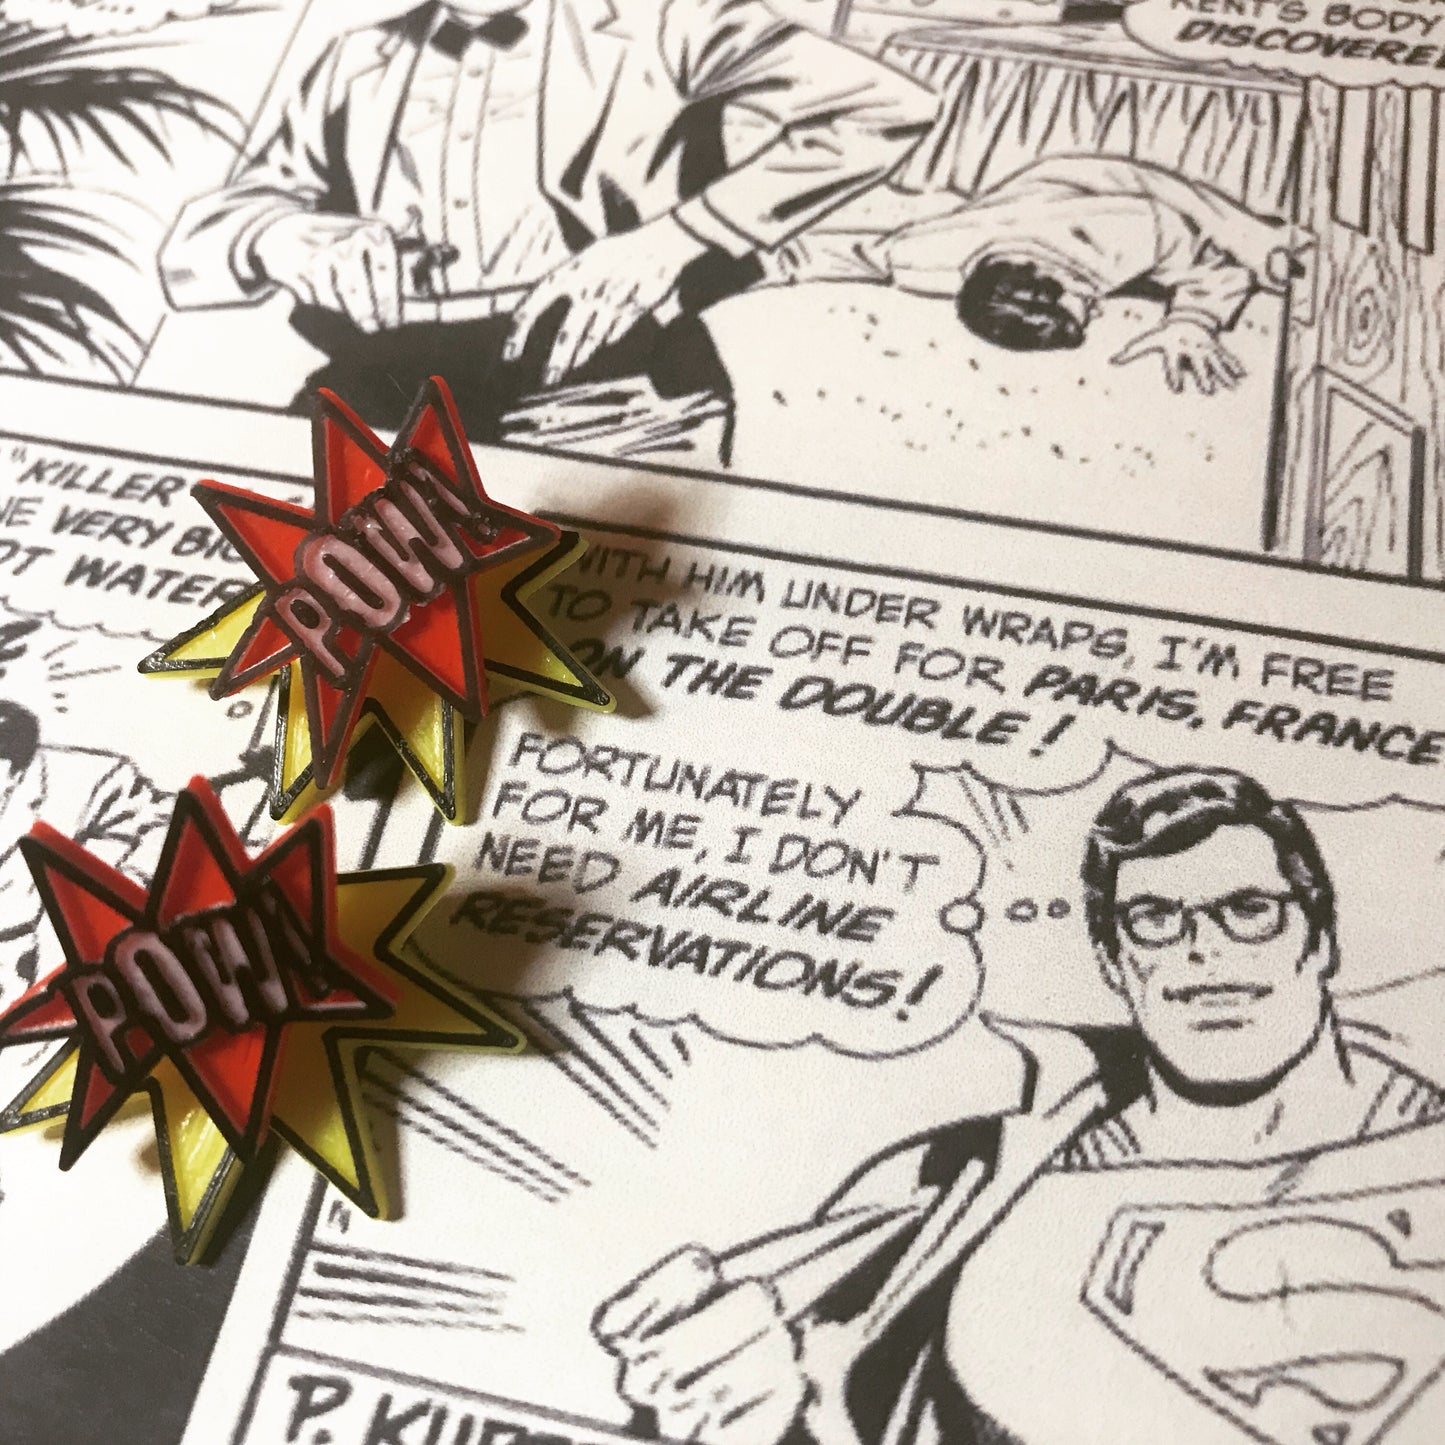 On a black and white comic book page with Superman/Clark Kent are two R+D earrings. They are front back earrings or ear jackets where there is a piece that hugs each side of the earlobe. The front shows a ref star burst that reads POW! in white. It is all outlined in black. The piece that fits behind the ear is a yellow starburst with a black outline. They are meant to look like a classic comic book illustration of a sound.